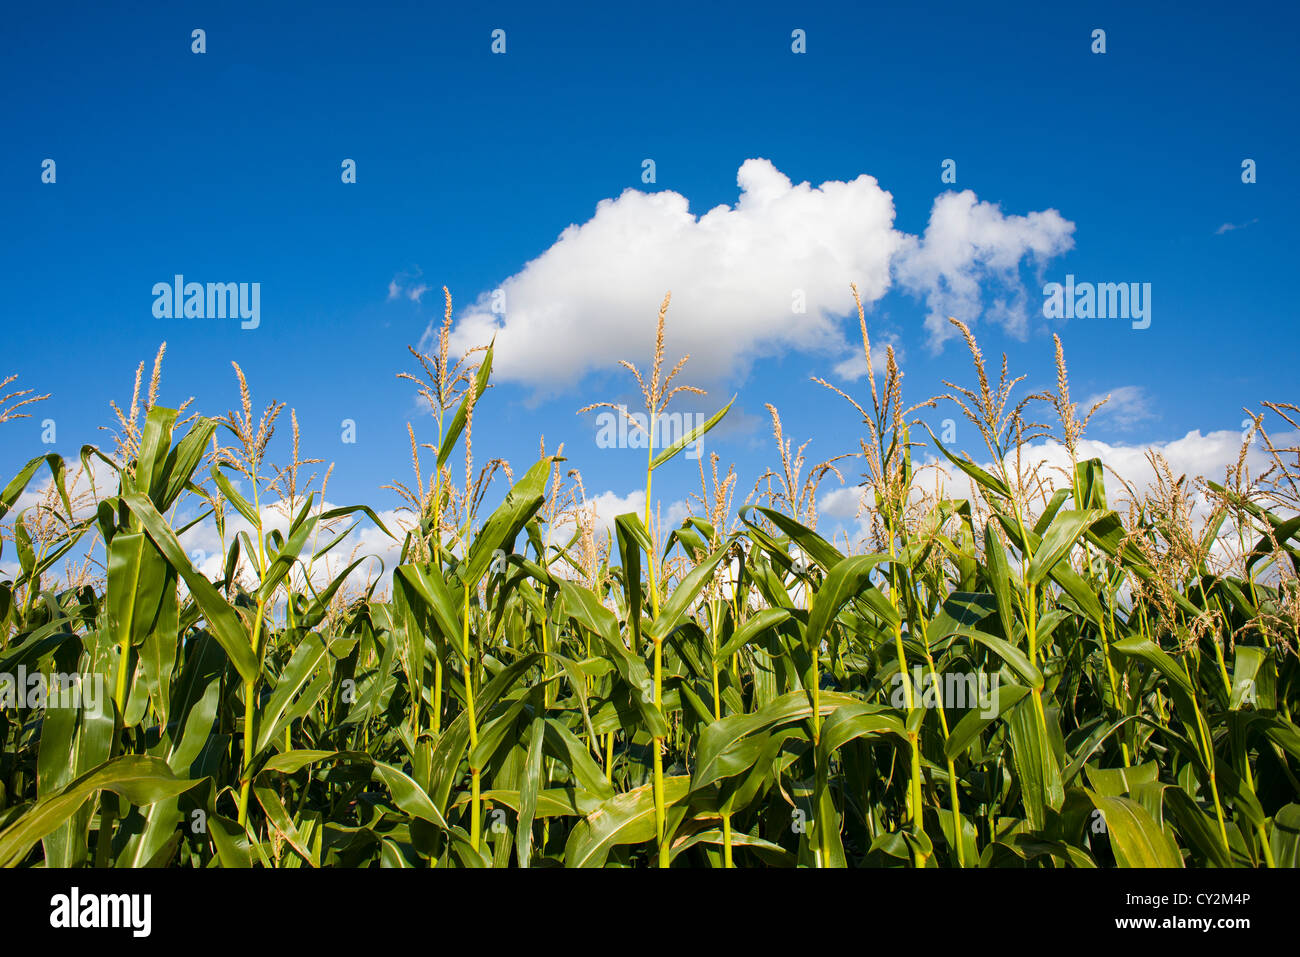 Commercial maize crop grown for animal fodder, Norfolk, England October Stock Photo